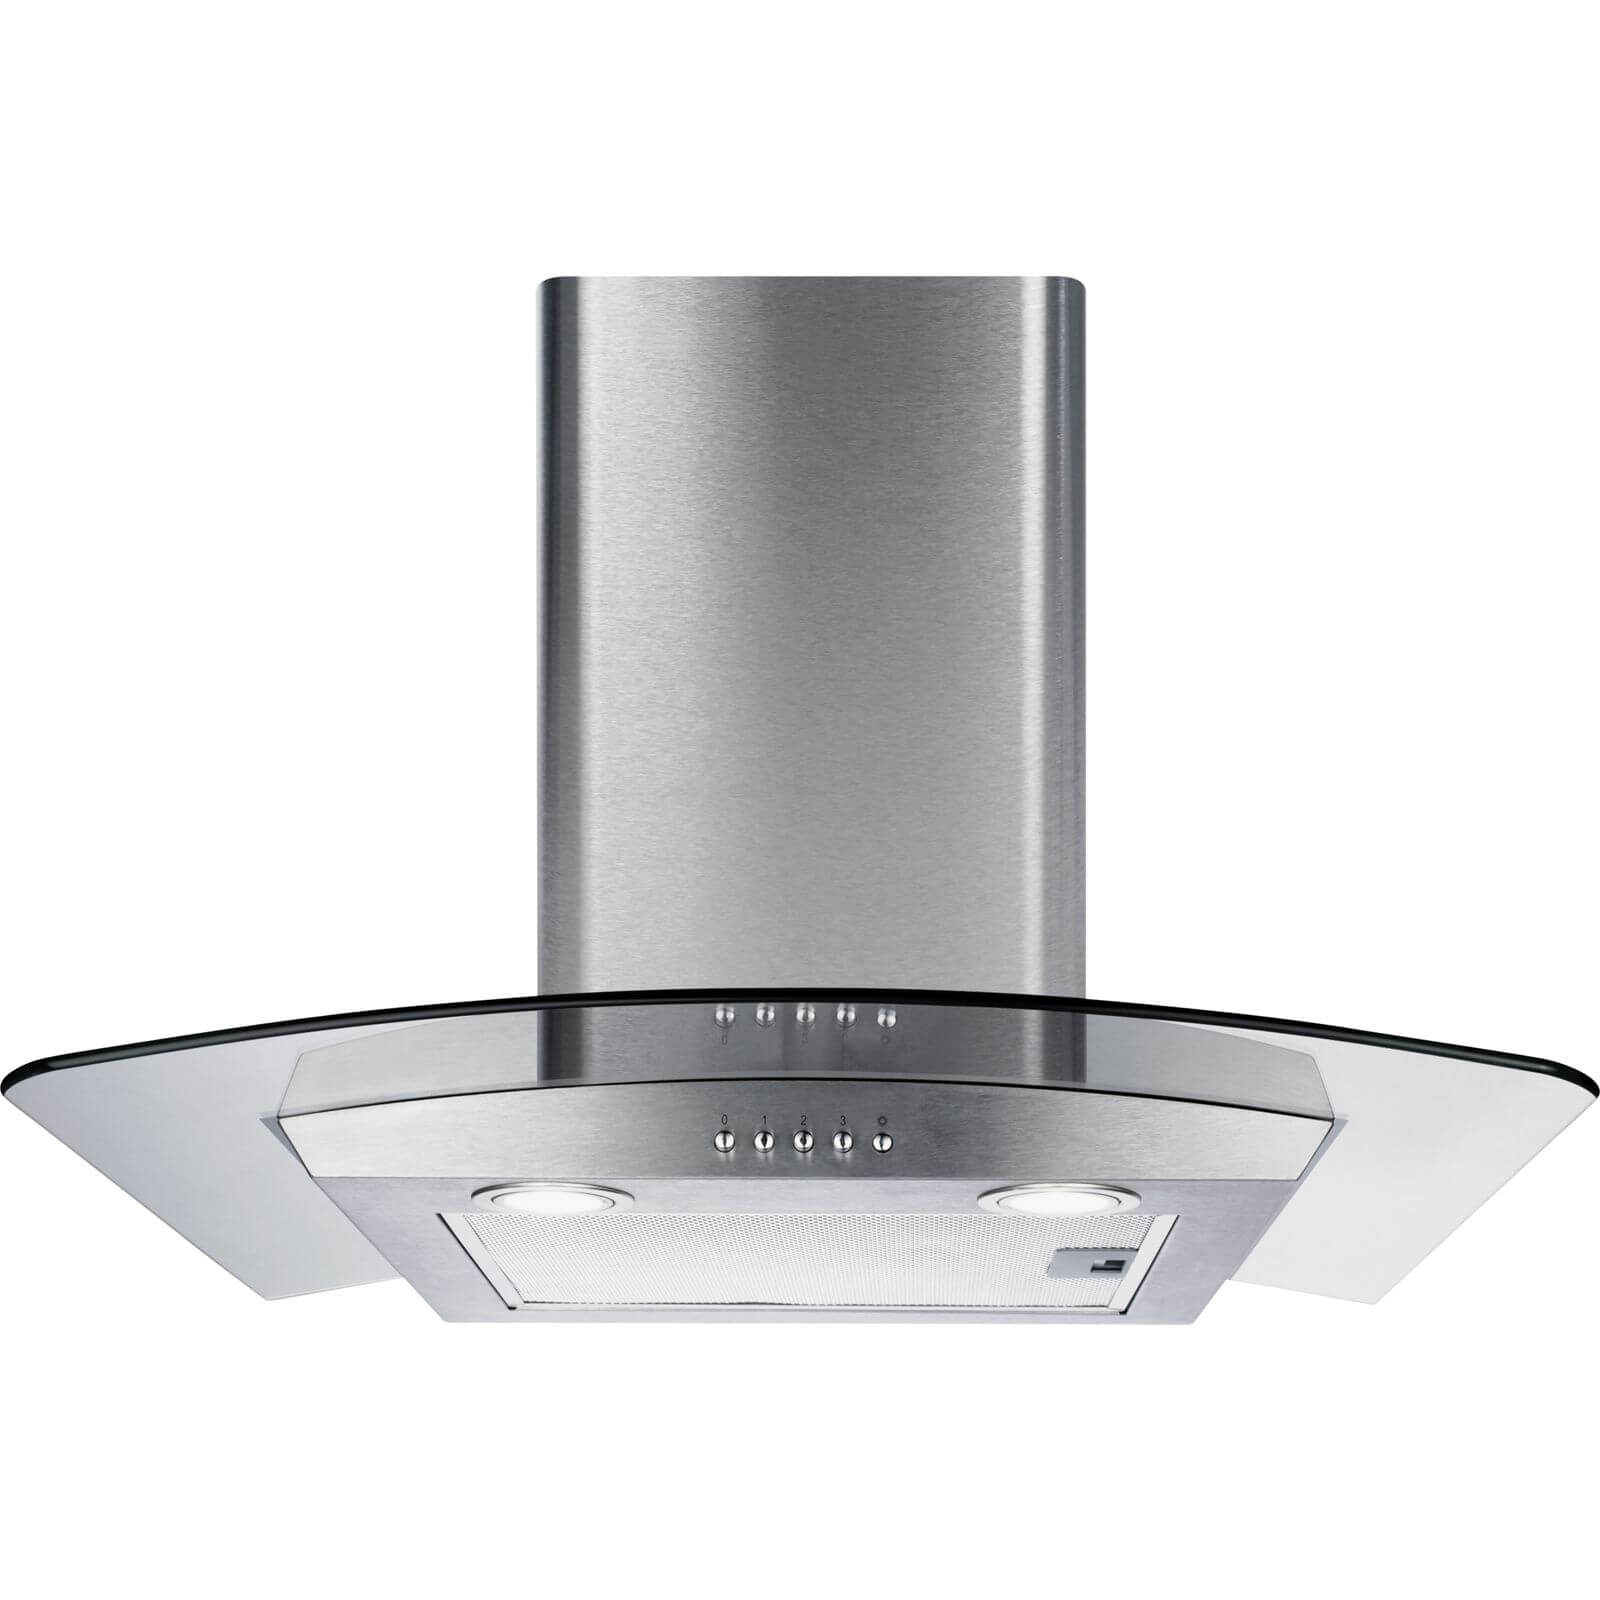 CDA ECP62SS Curved Glass Chimney Cooker Hood - 60cm - Stainless Steel